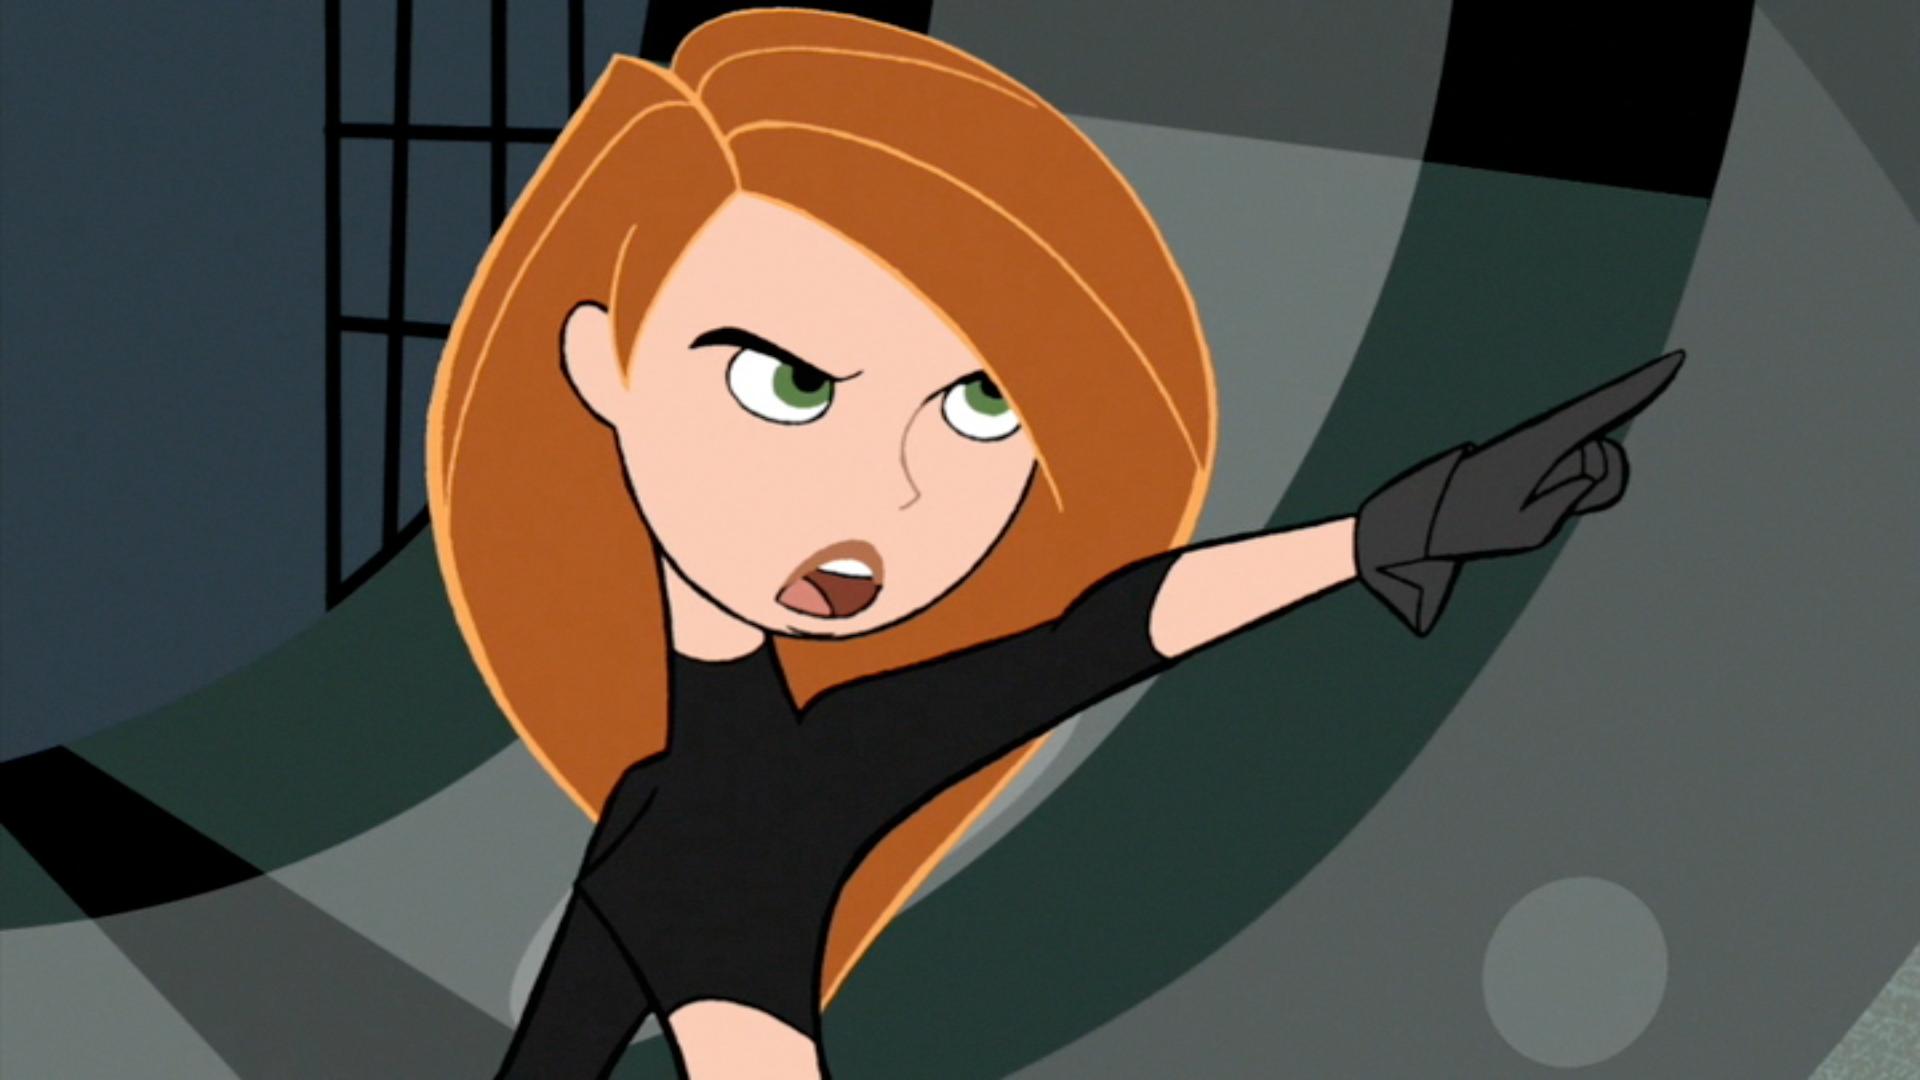 strp/kim_possible_outfit_2_by_capricorn360-d2sfejp.jpg?token... q_75" ...